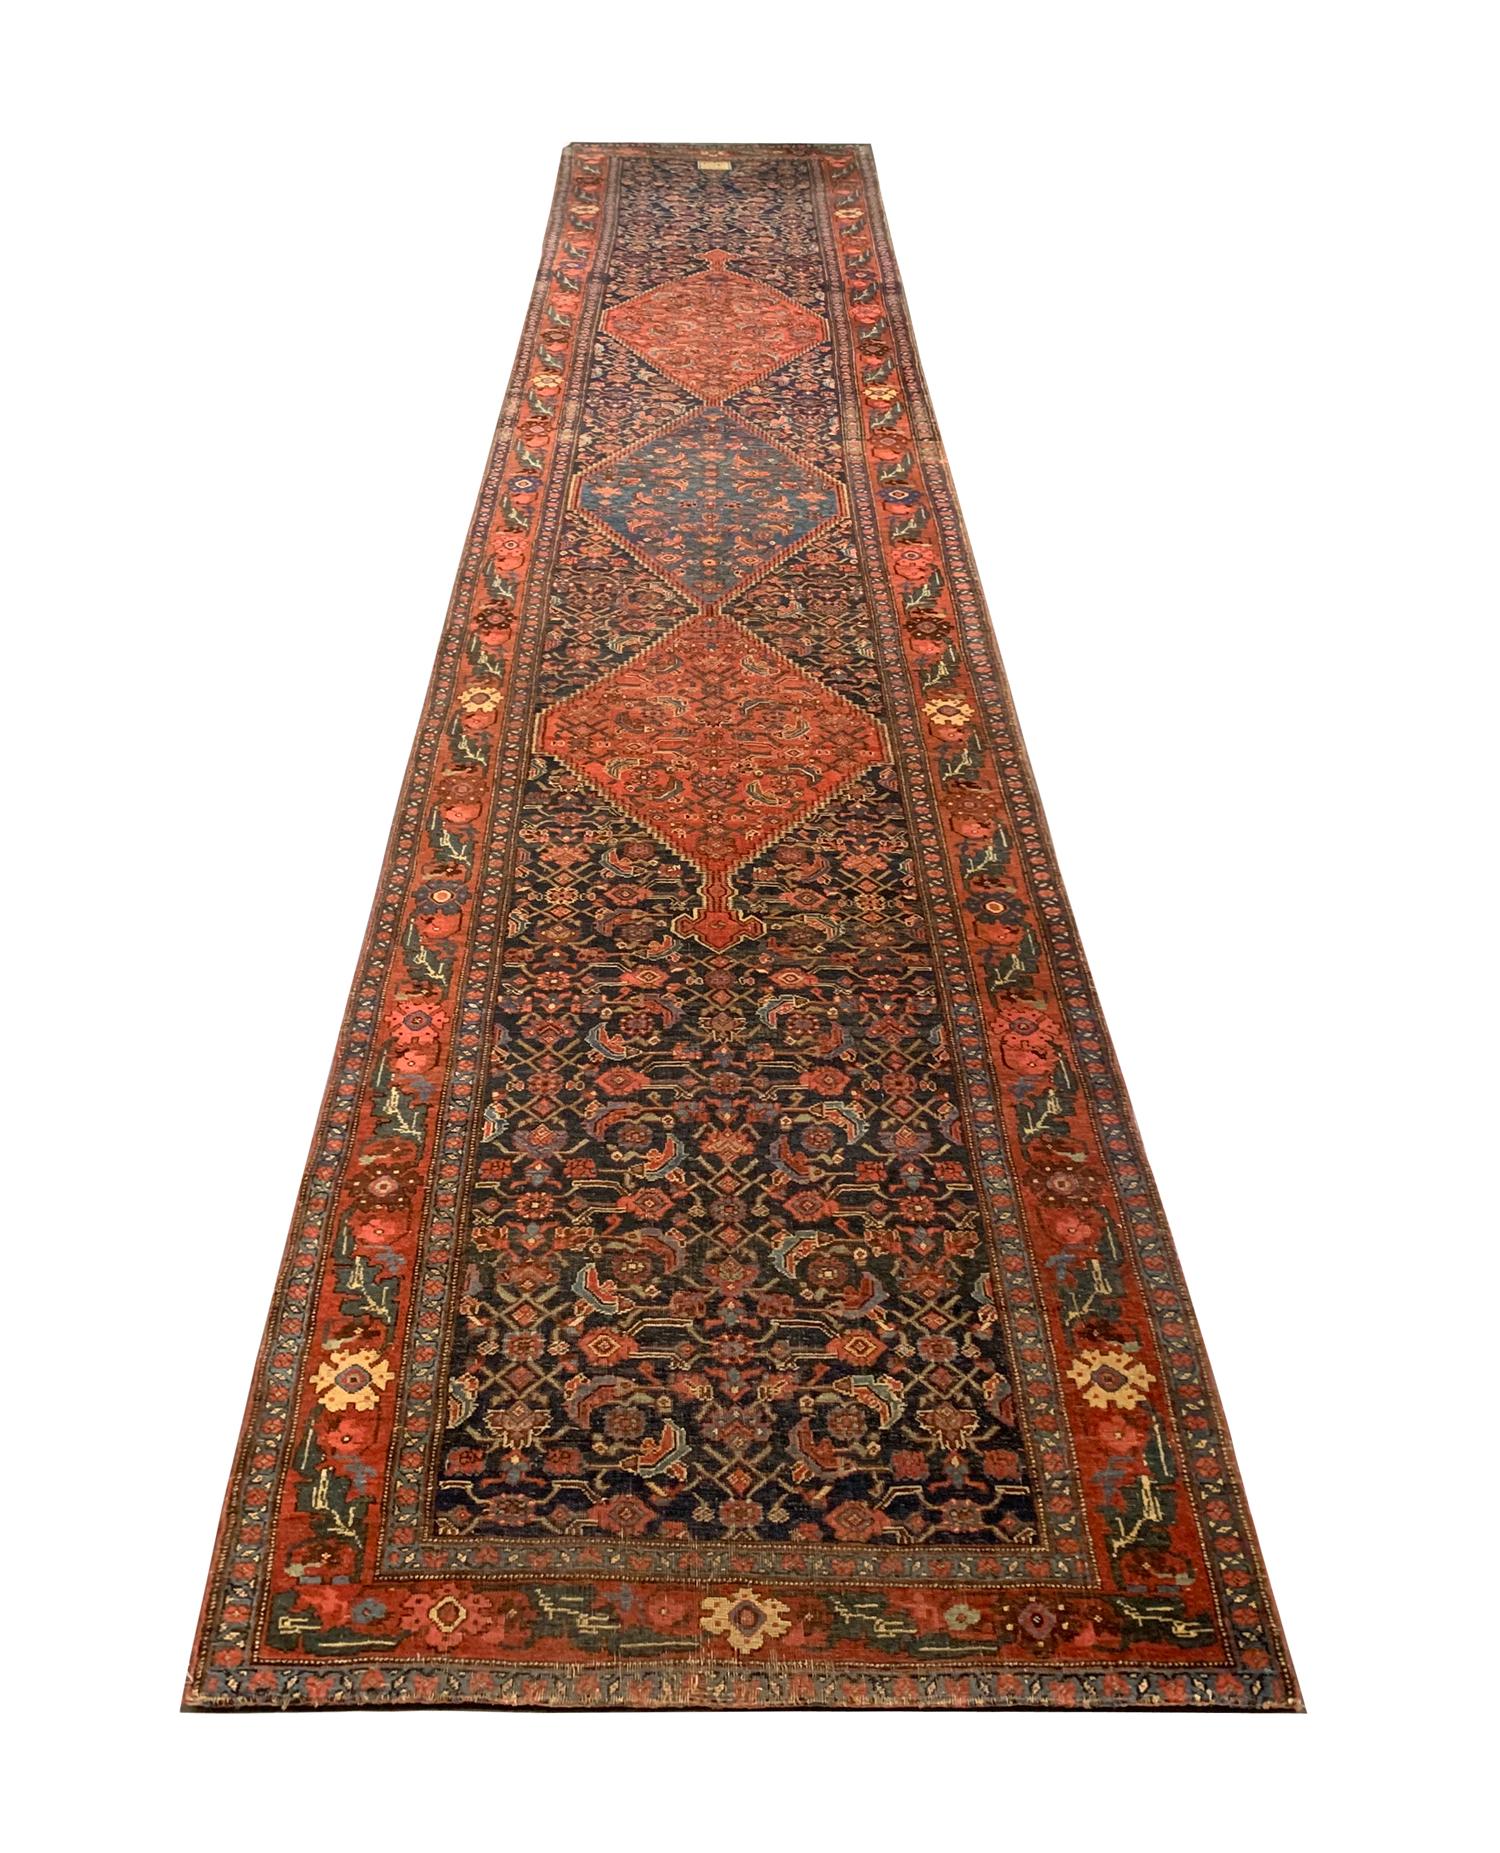 This fine wool Kurdish Antique Runner Rug is an excellent example of carpets woven in the late 19th century, circa 1890. This piece is an extremely rare rug; its intricate detail, satisfactory quality, and craftsmanship make it a highly collectable